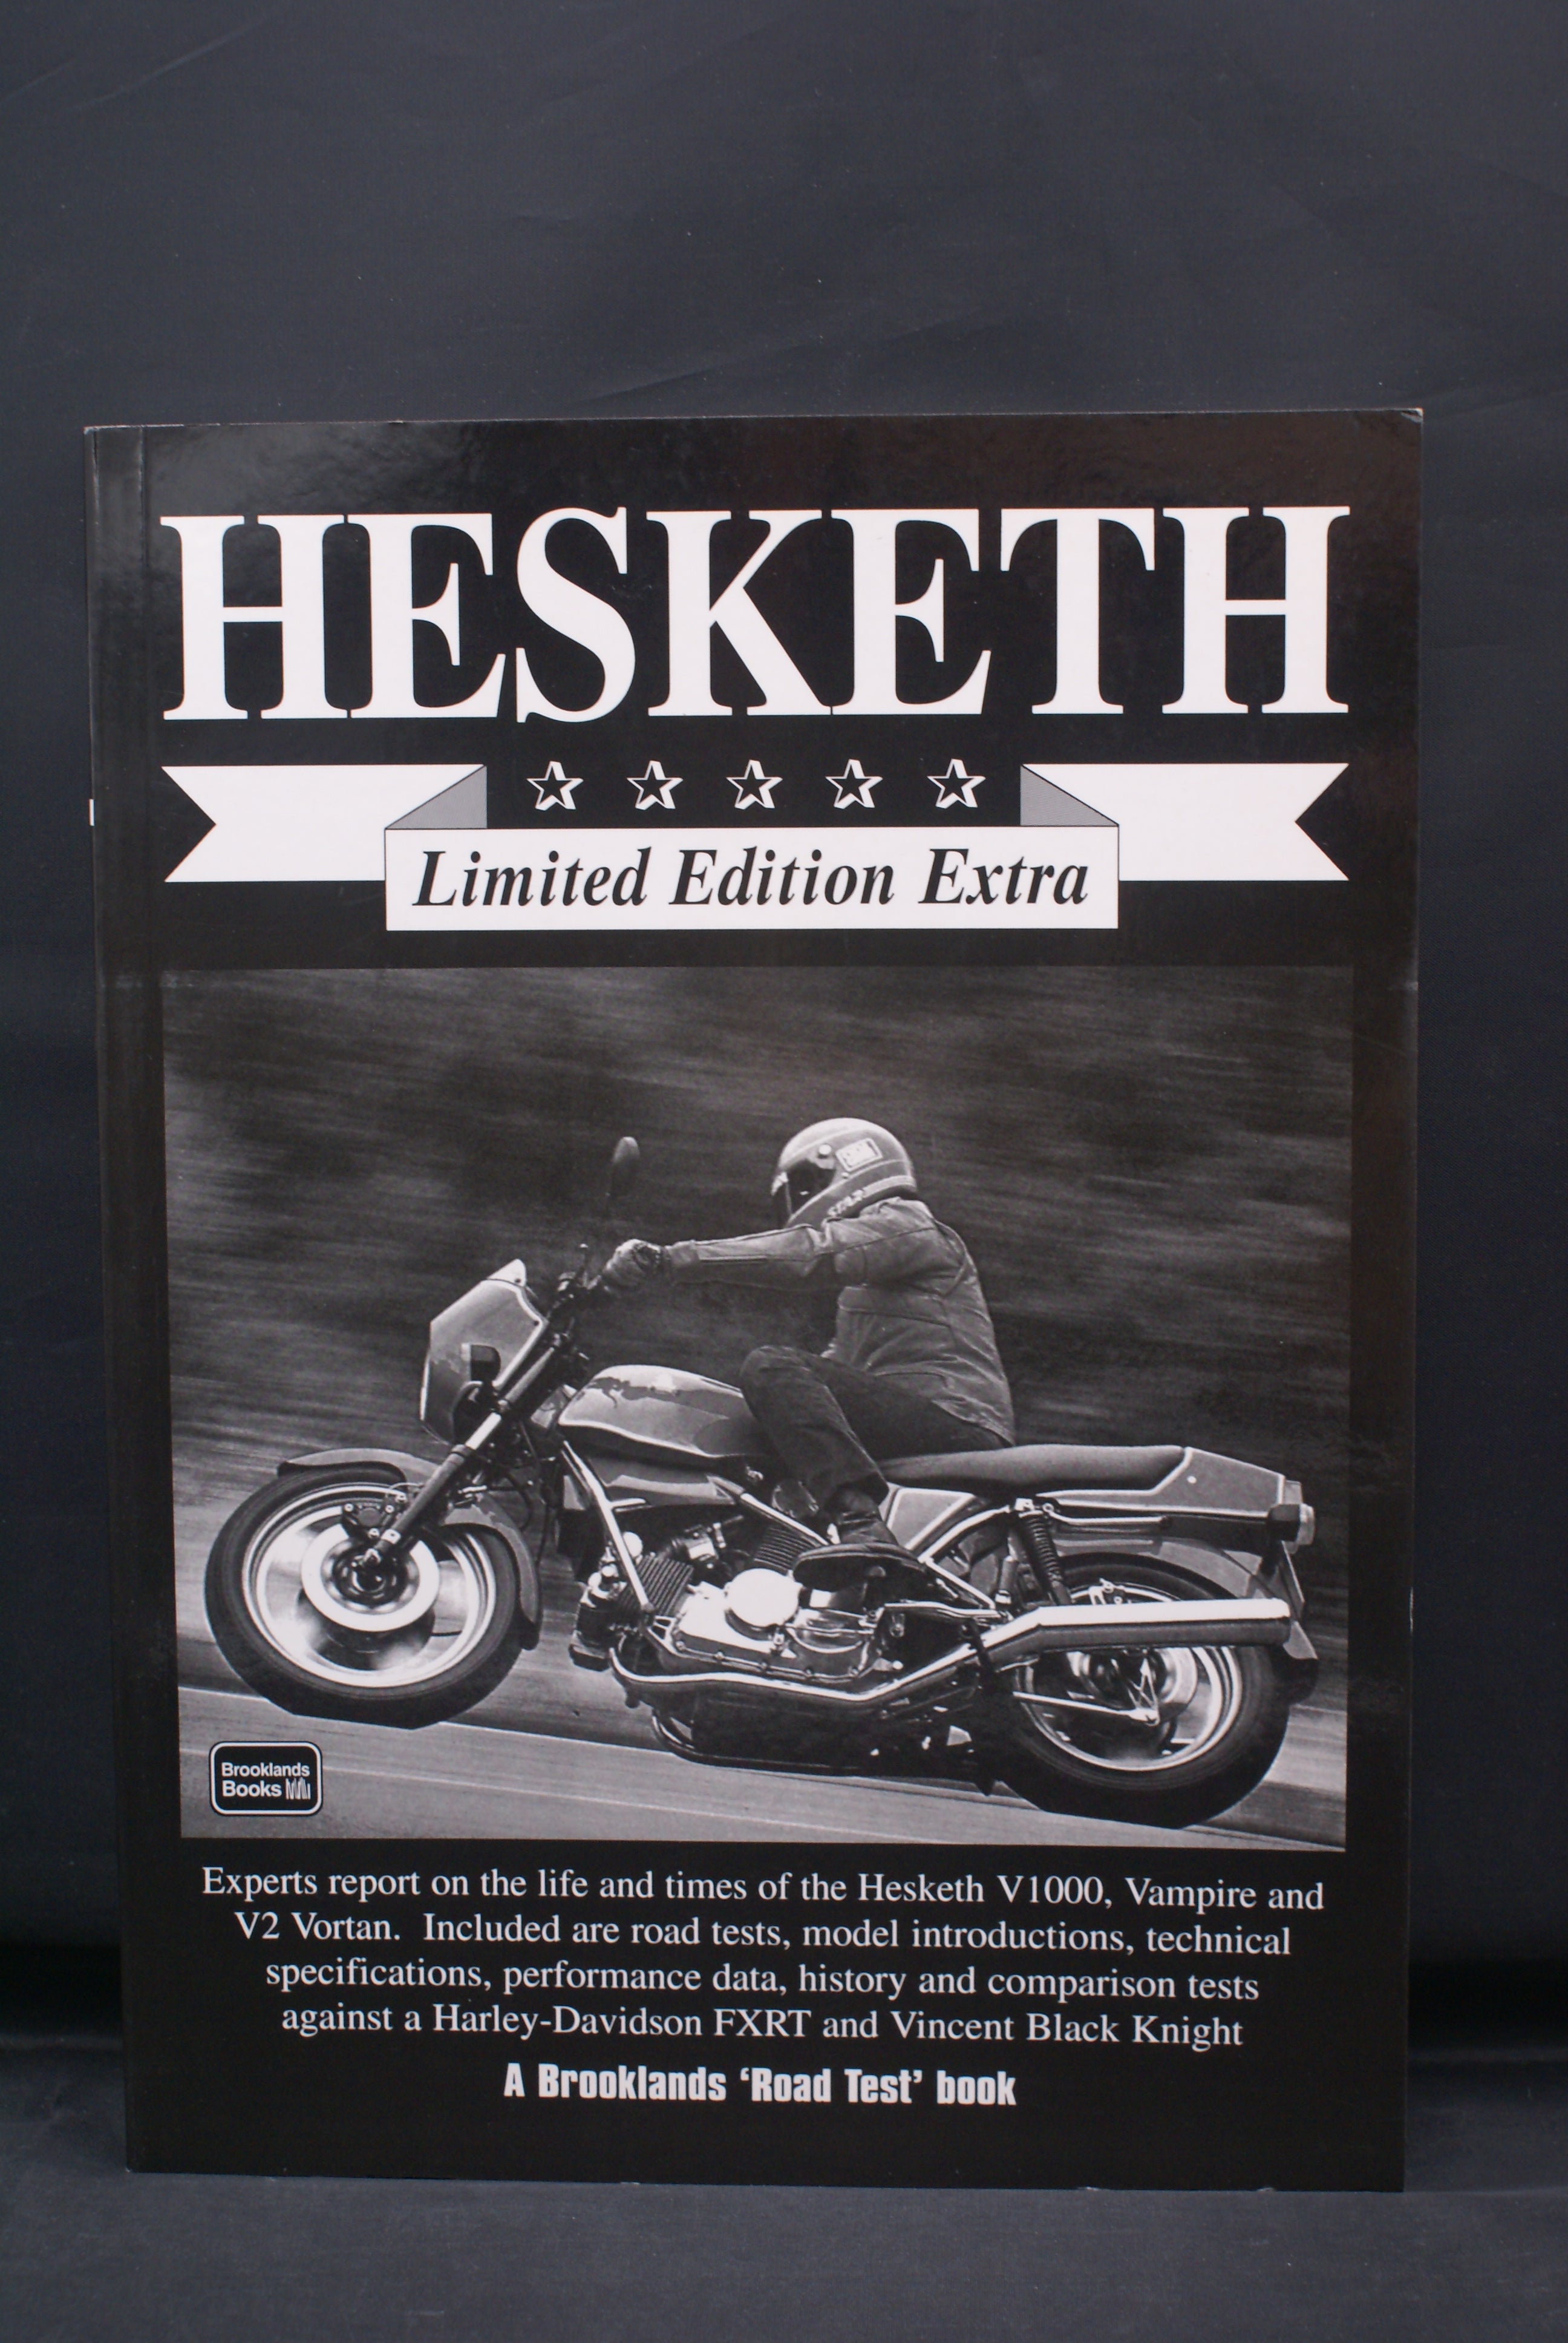 Hesketh, Limited Edition Extra